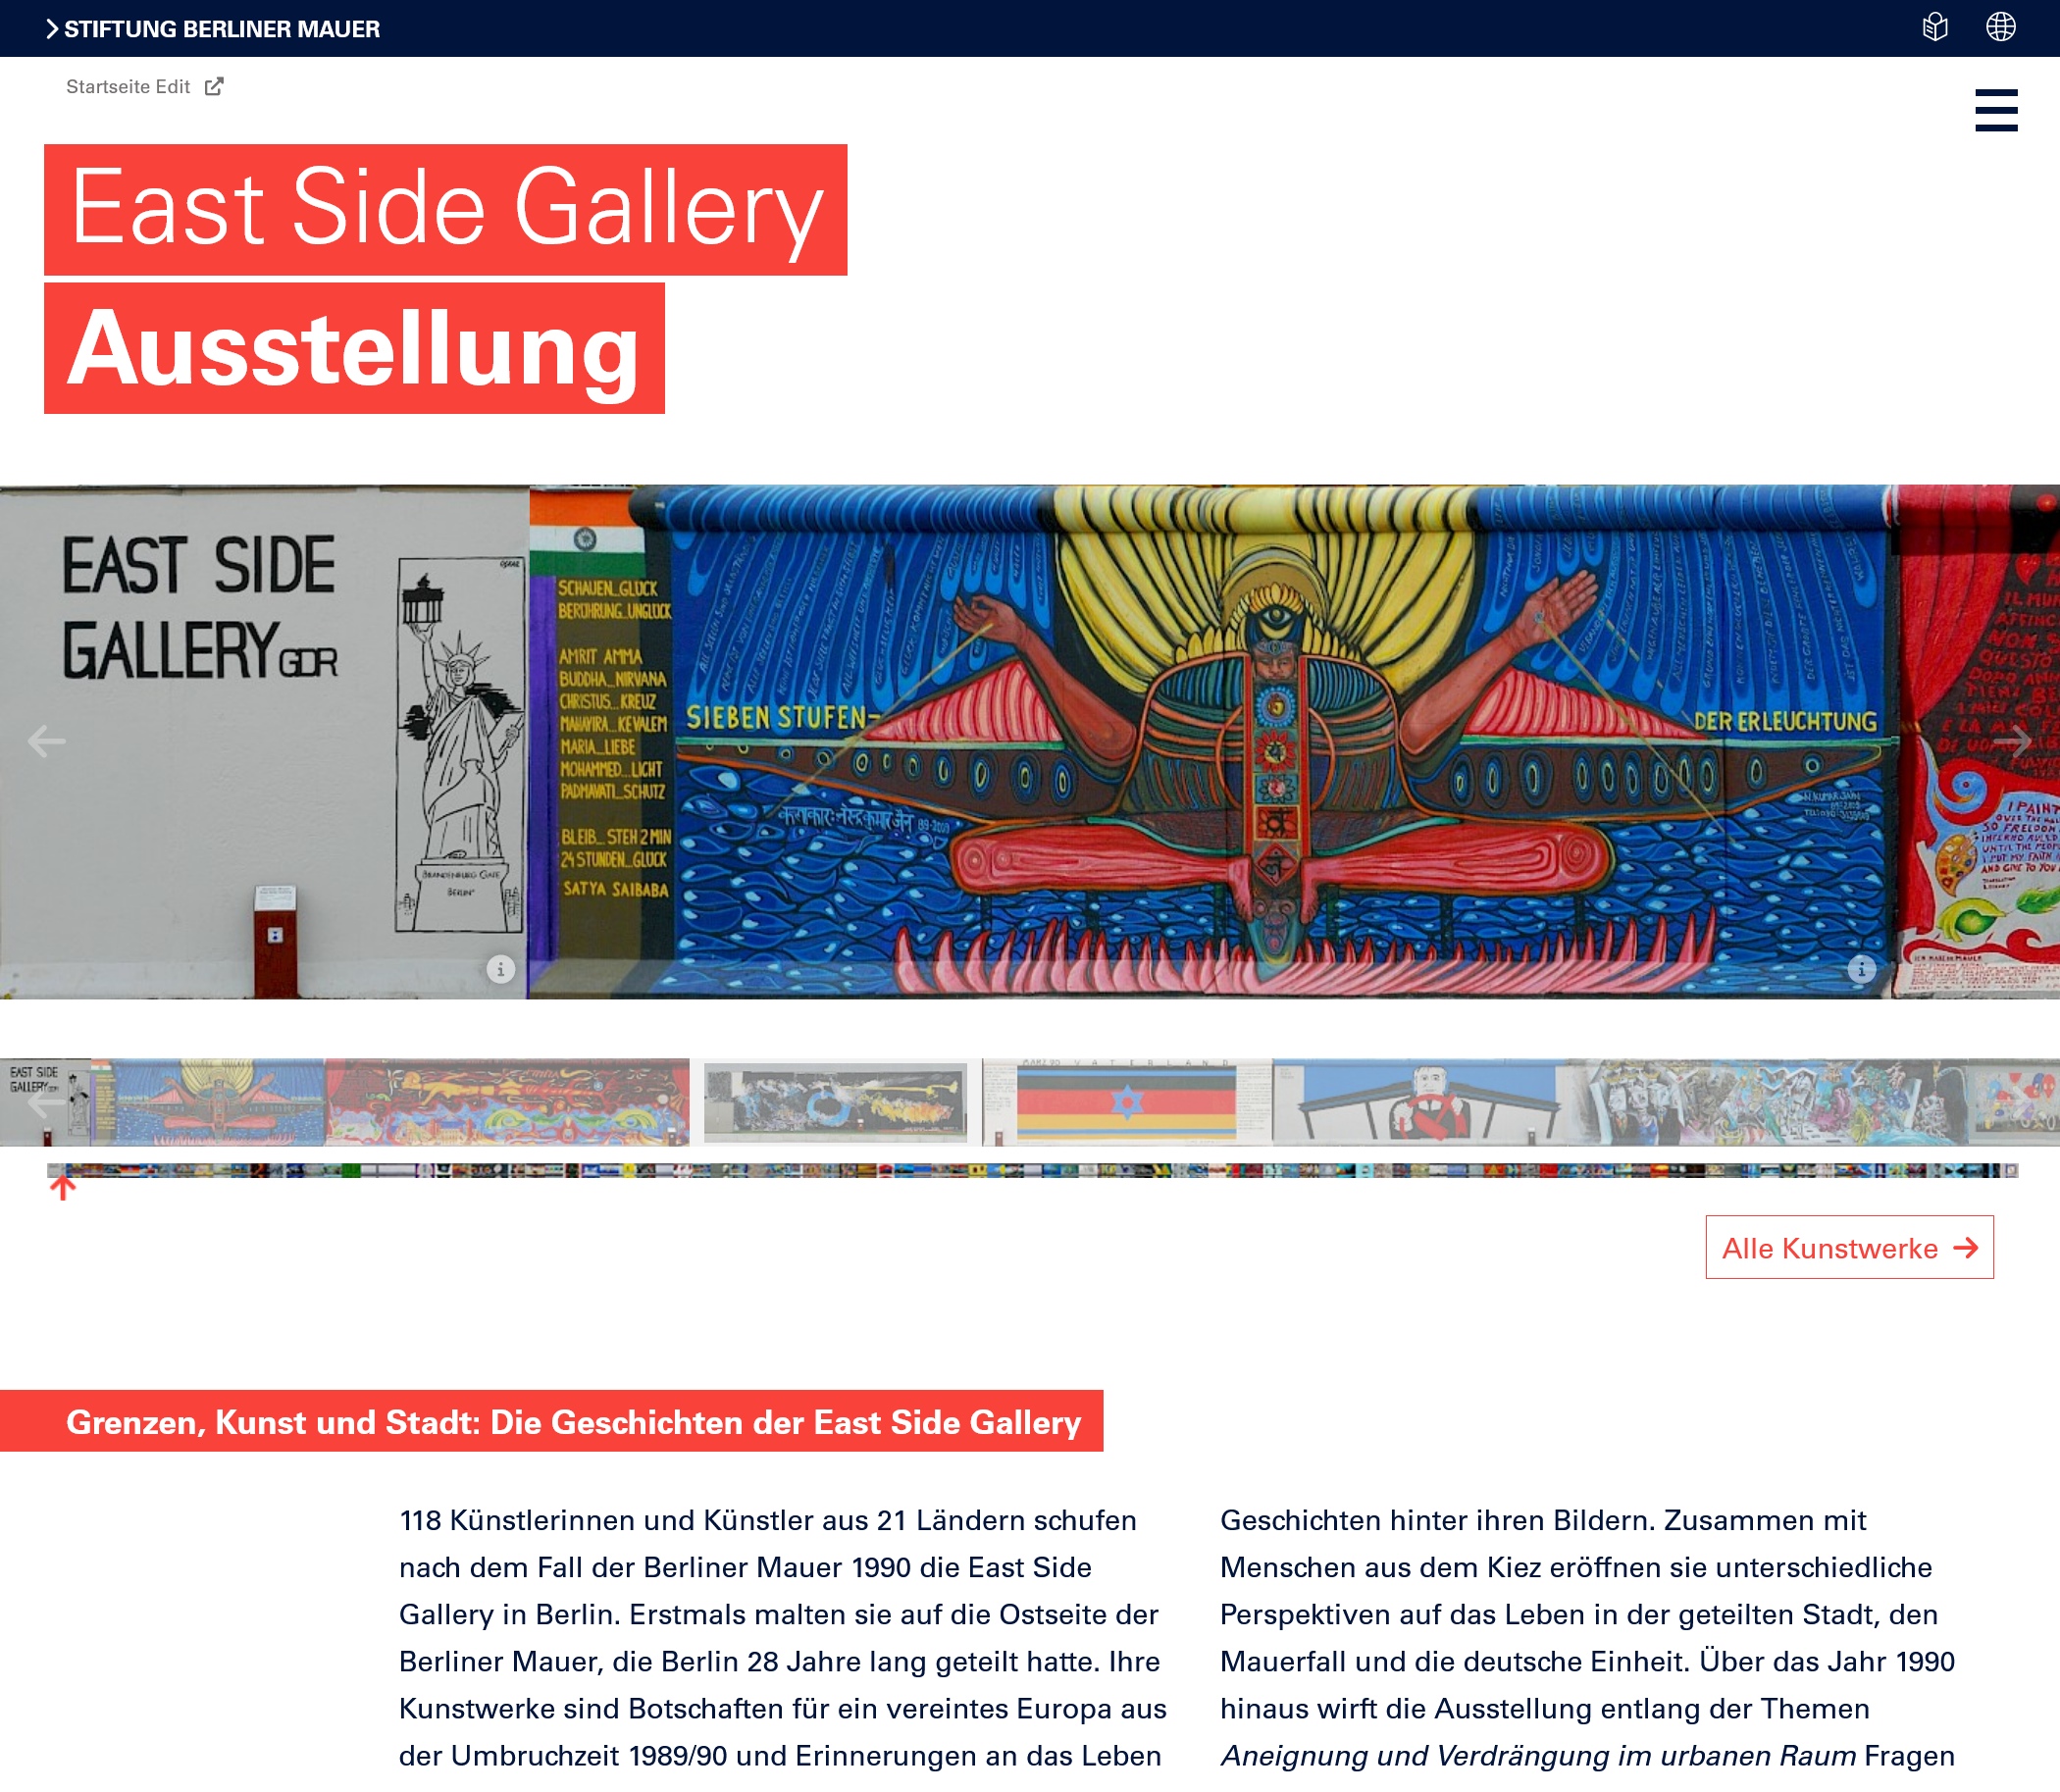 Online exhibition of the Berlin East Side Gallery